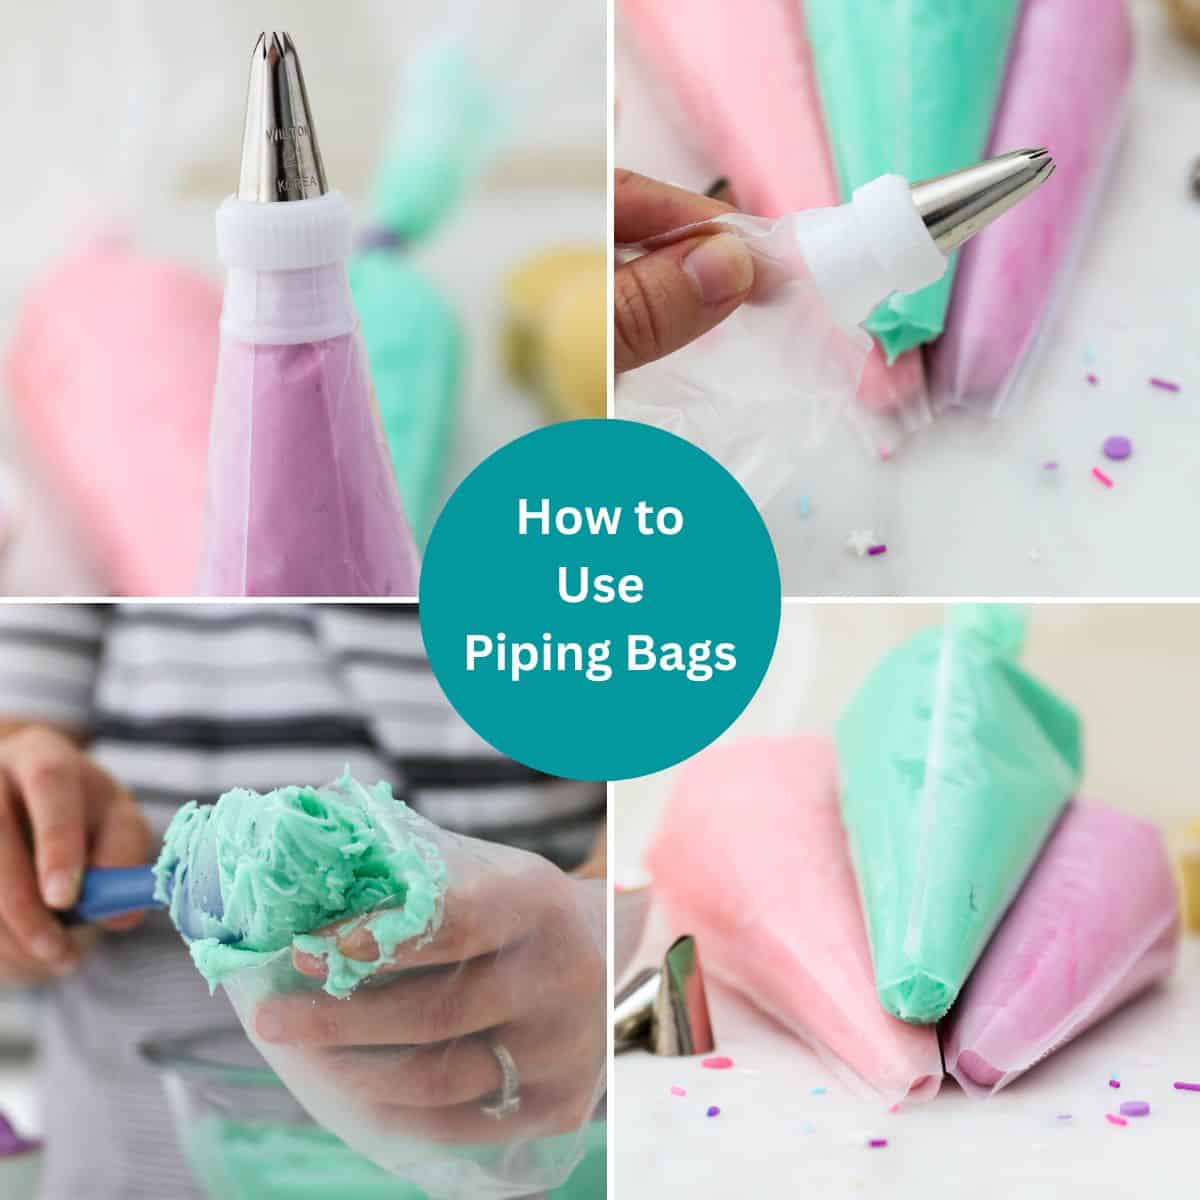 Share 60+ piping bags and tips michaels - esthdonghoadian